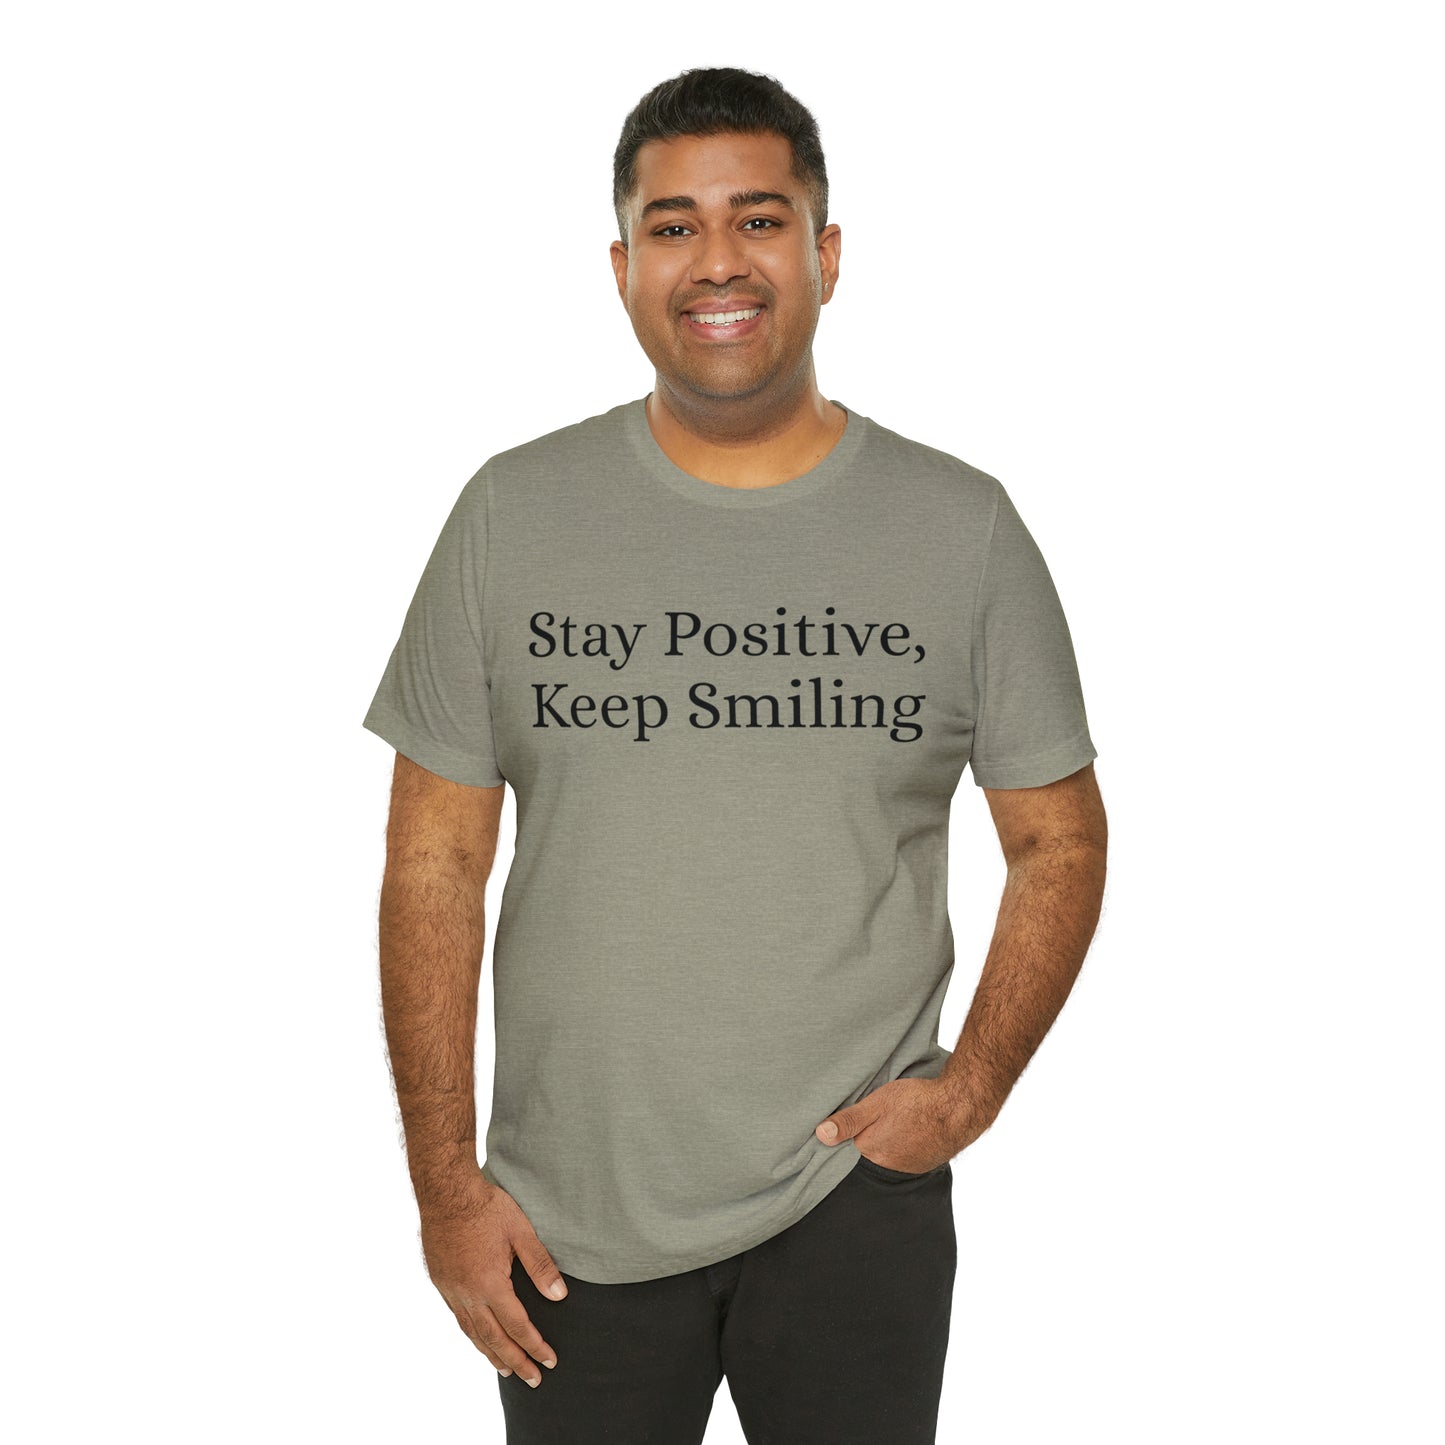 Stay Positive, Keep Smiling